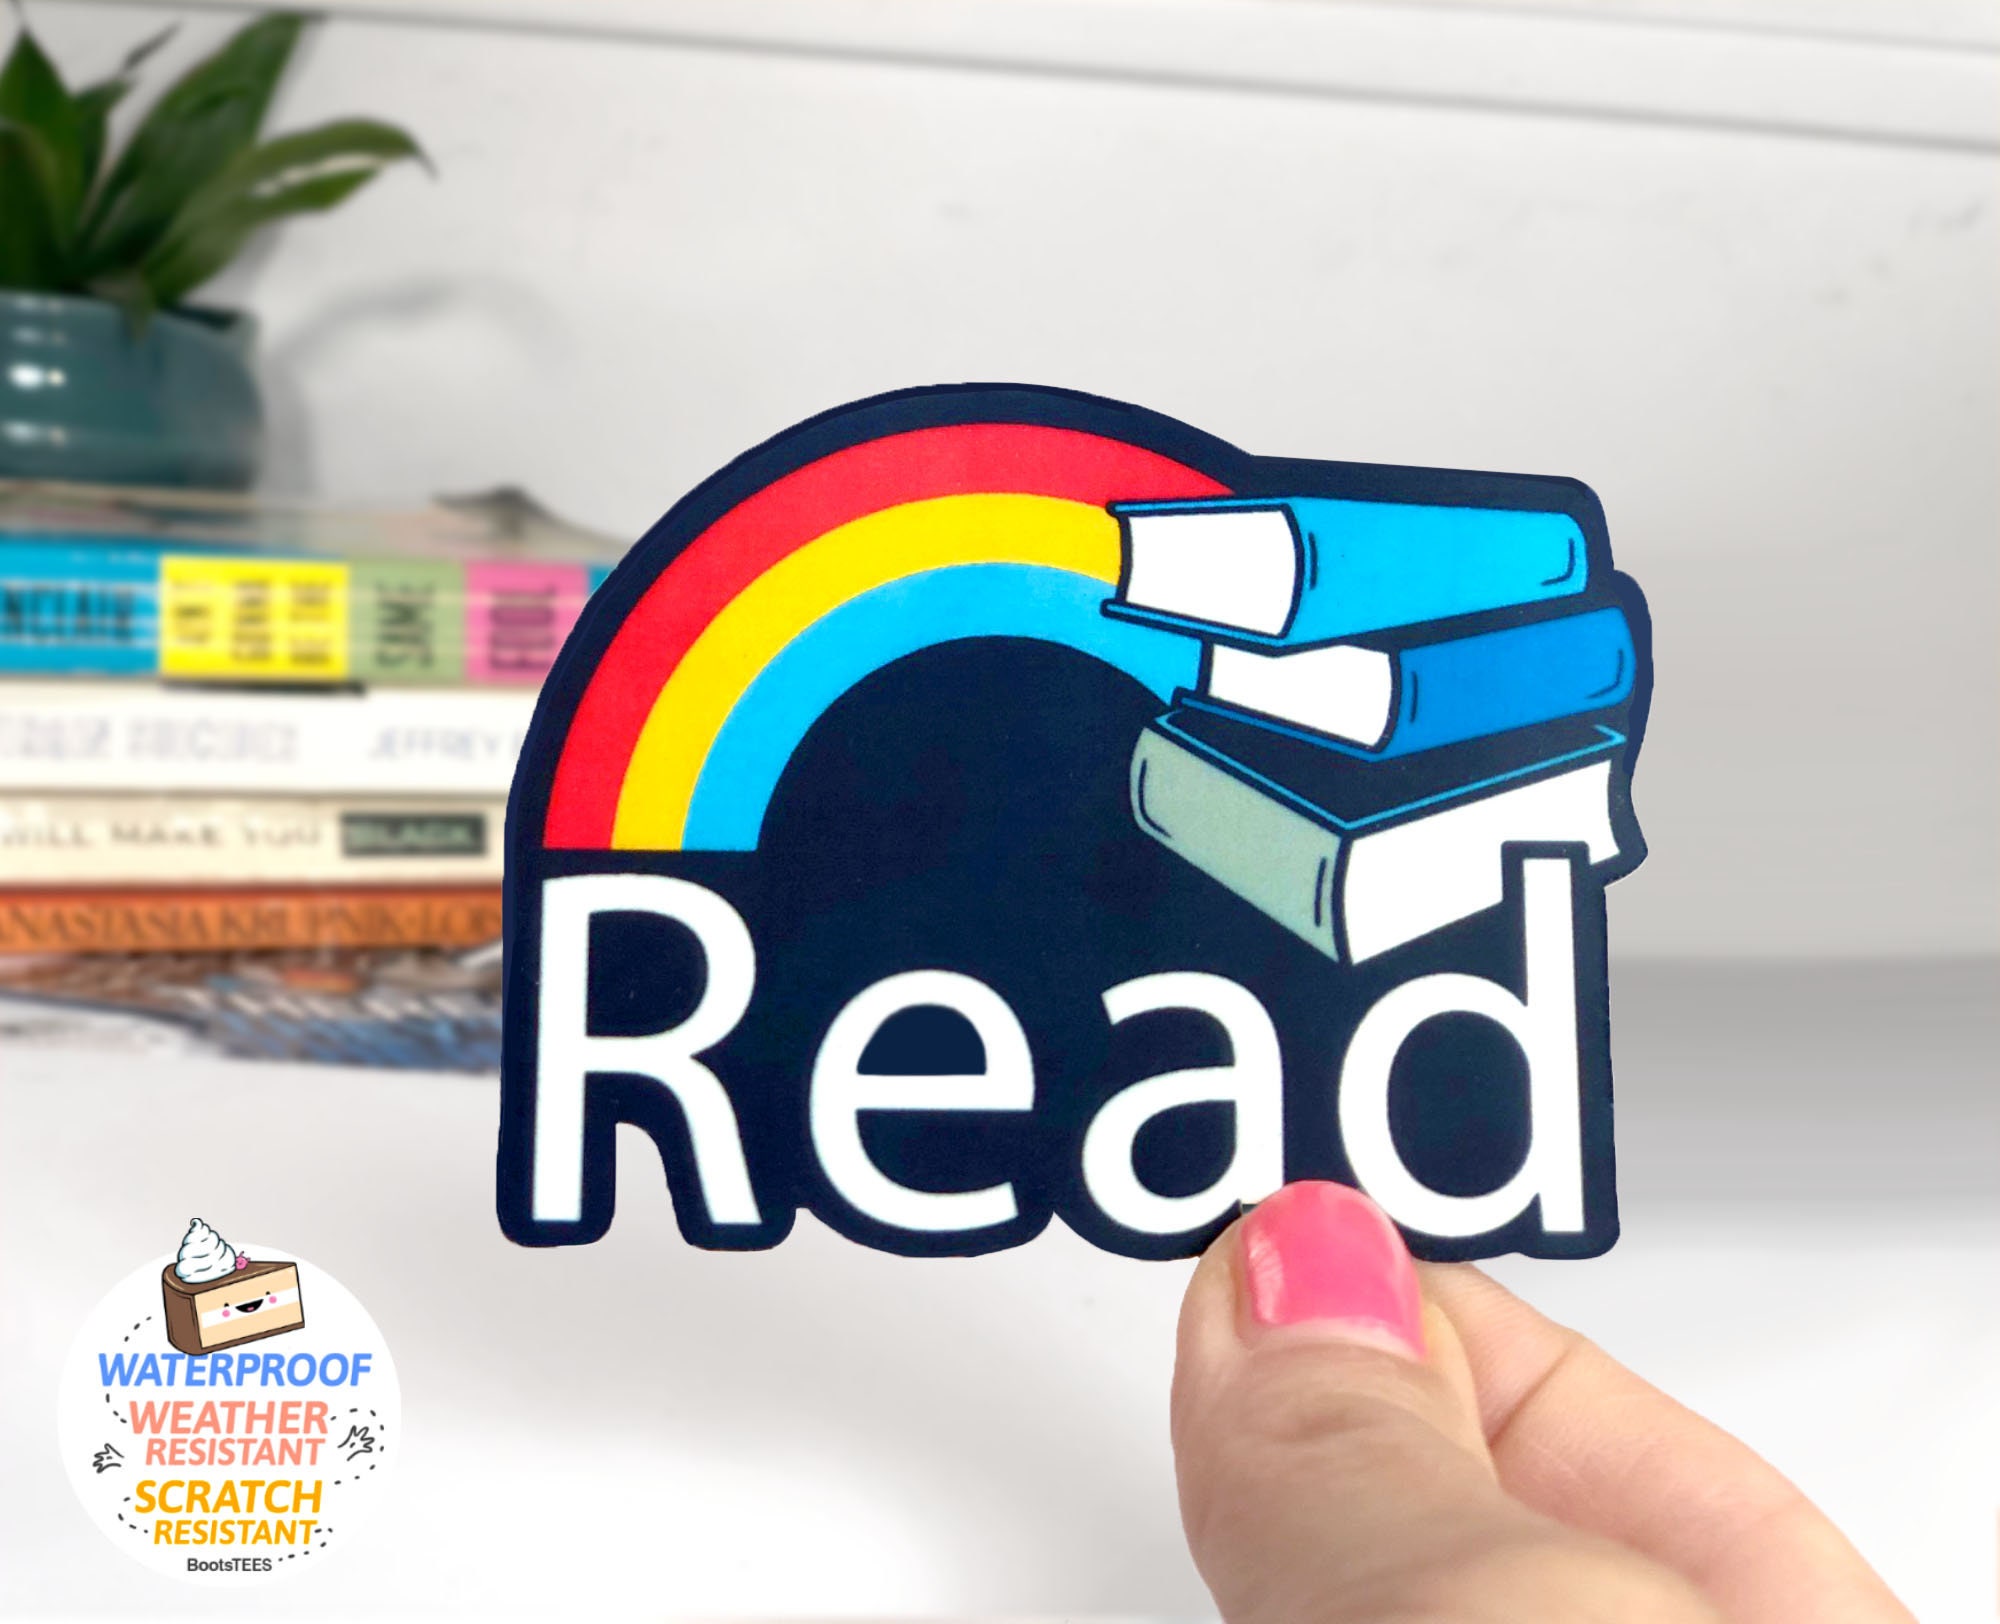 100 Pcs Book Stickers,Reading Stickers,Bookish,Book Stickers for Water  Bottles,Bookish Items Stickers,Library Stickers,Book Accessories for  Reading